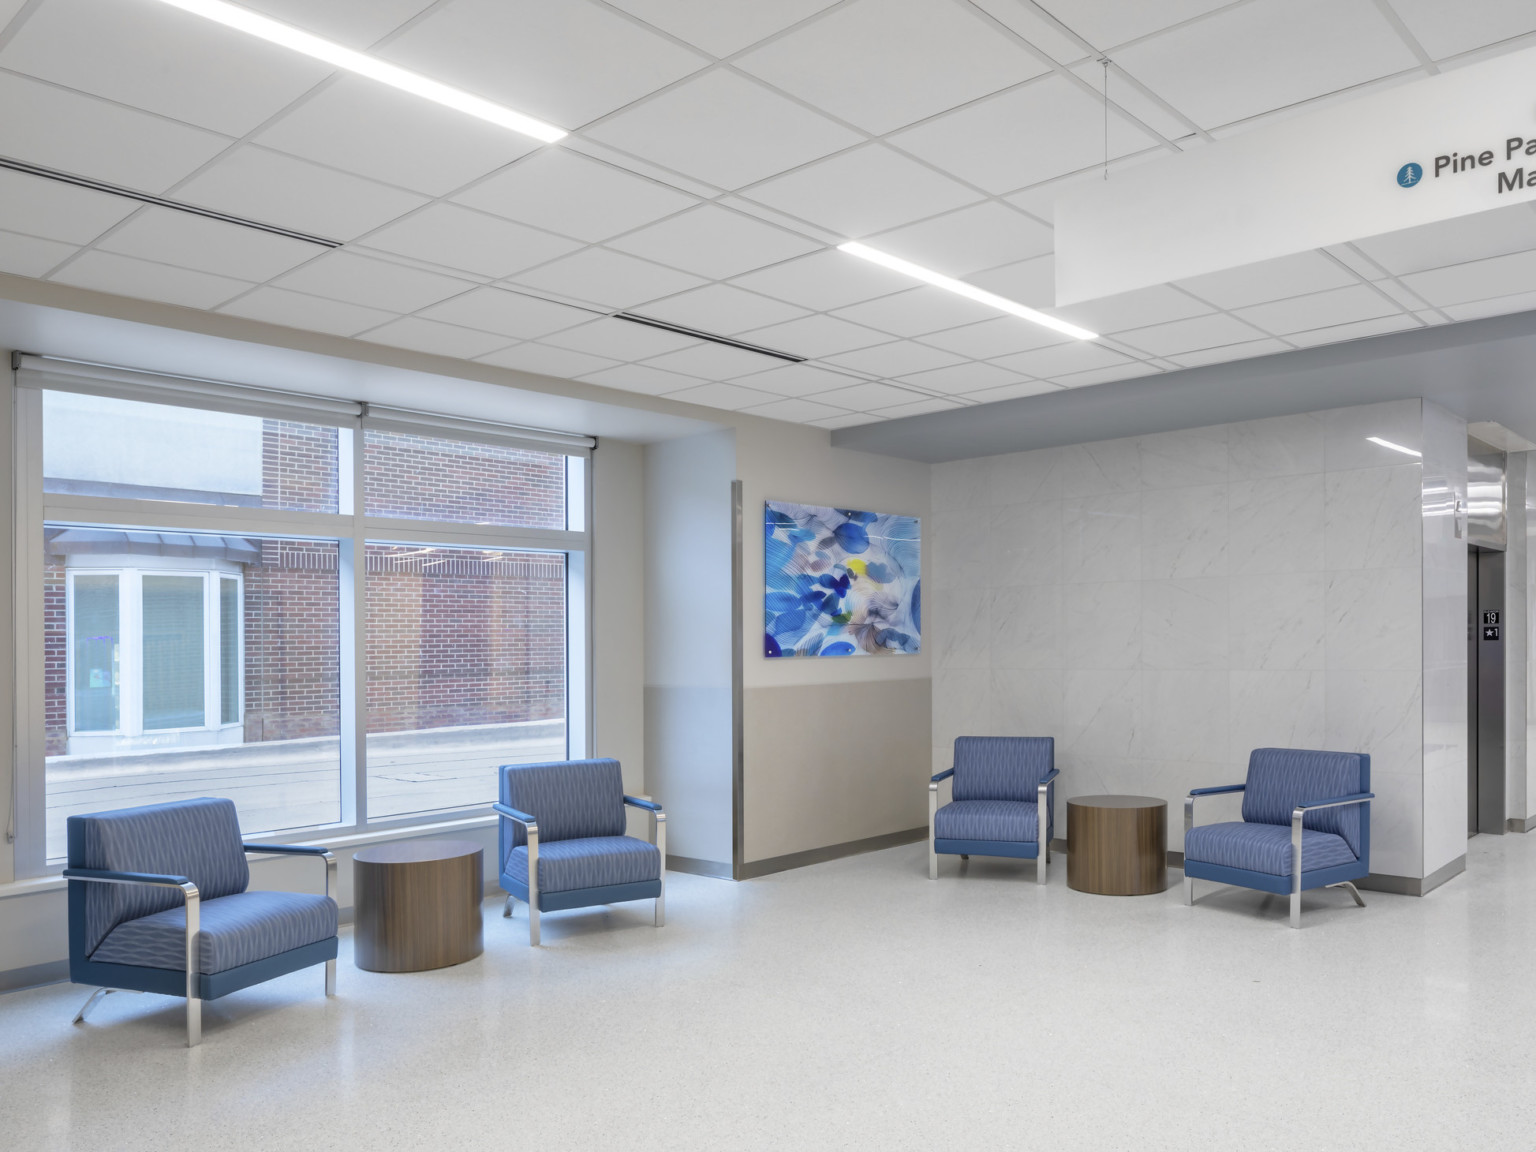 Hospital waiting room with large window looking out to brick wall and bay window. Blue arm chairs in white hallway, elevators